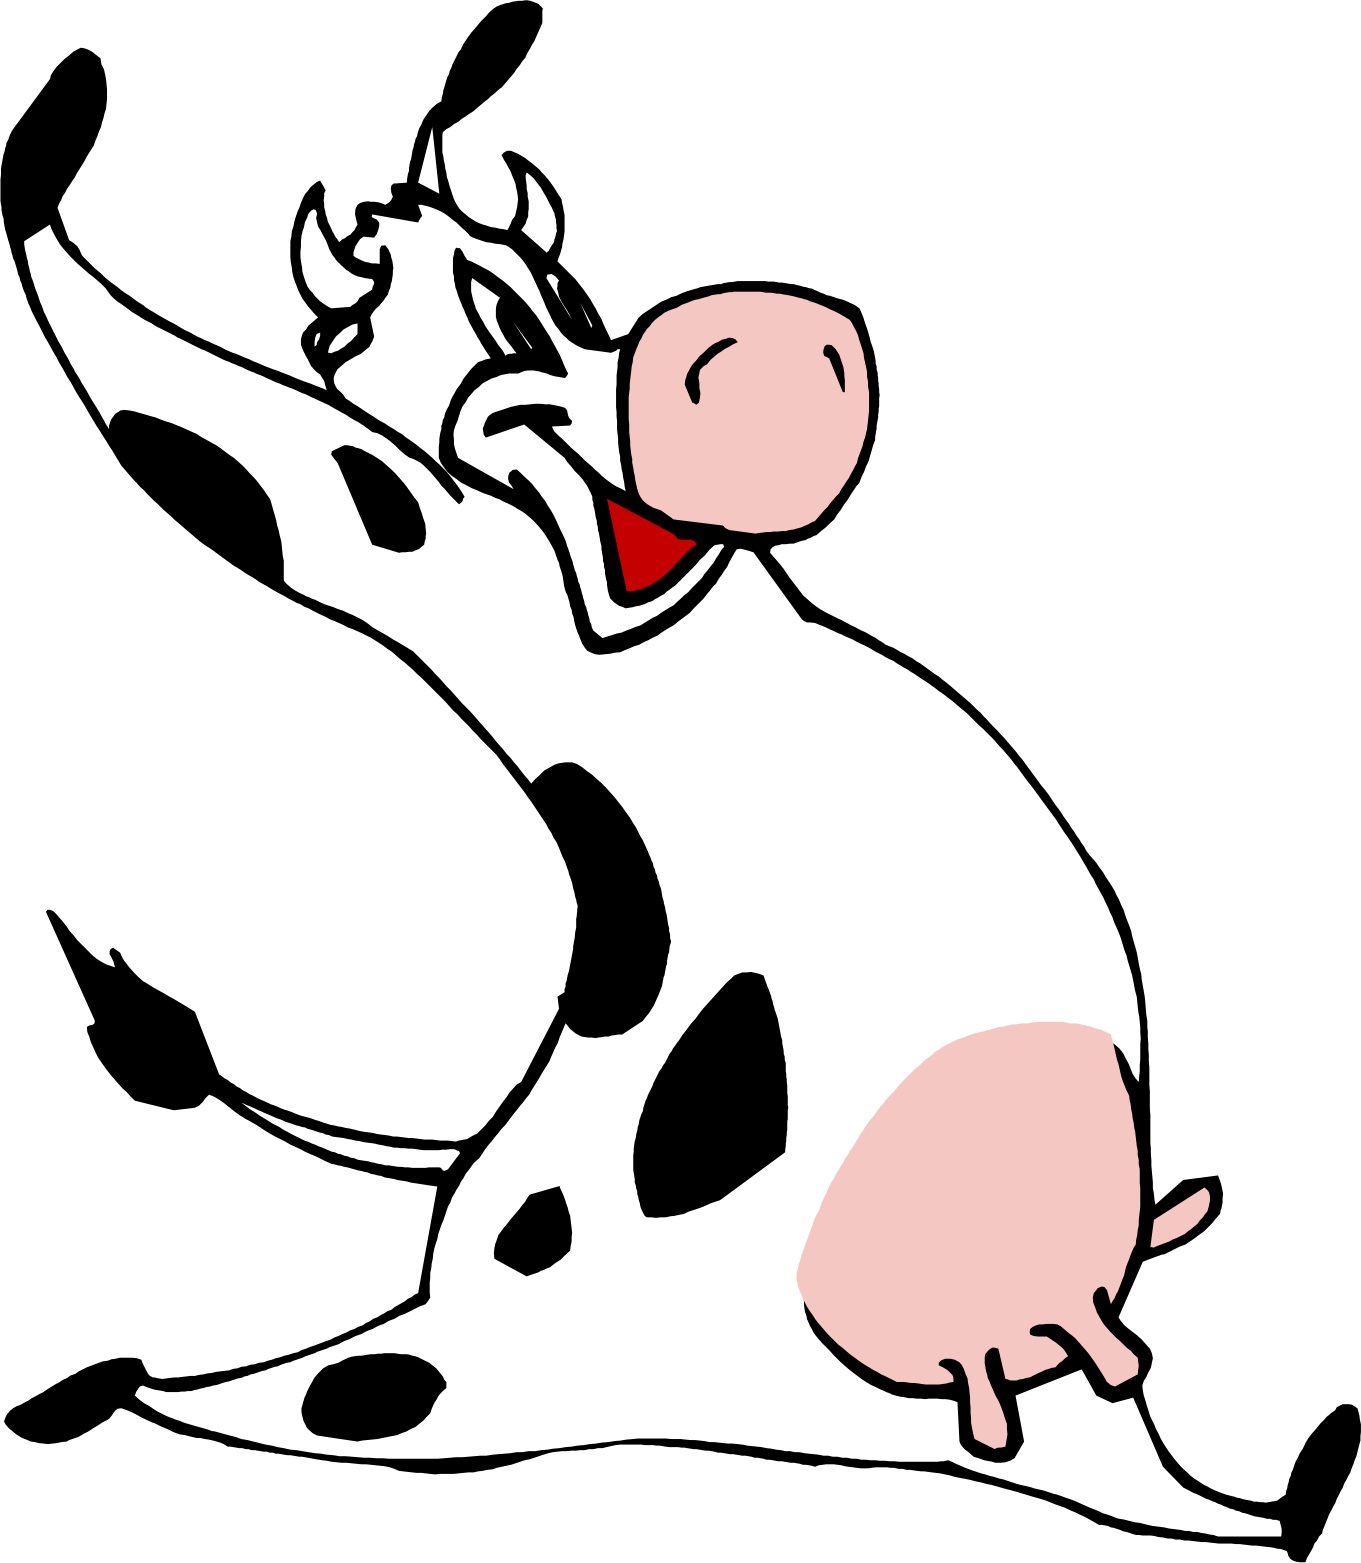 deviantART: More Like Cartoon Cow PNG + PSD by